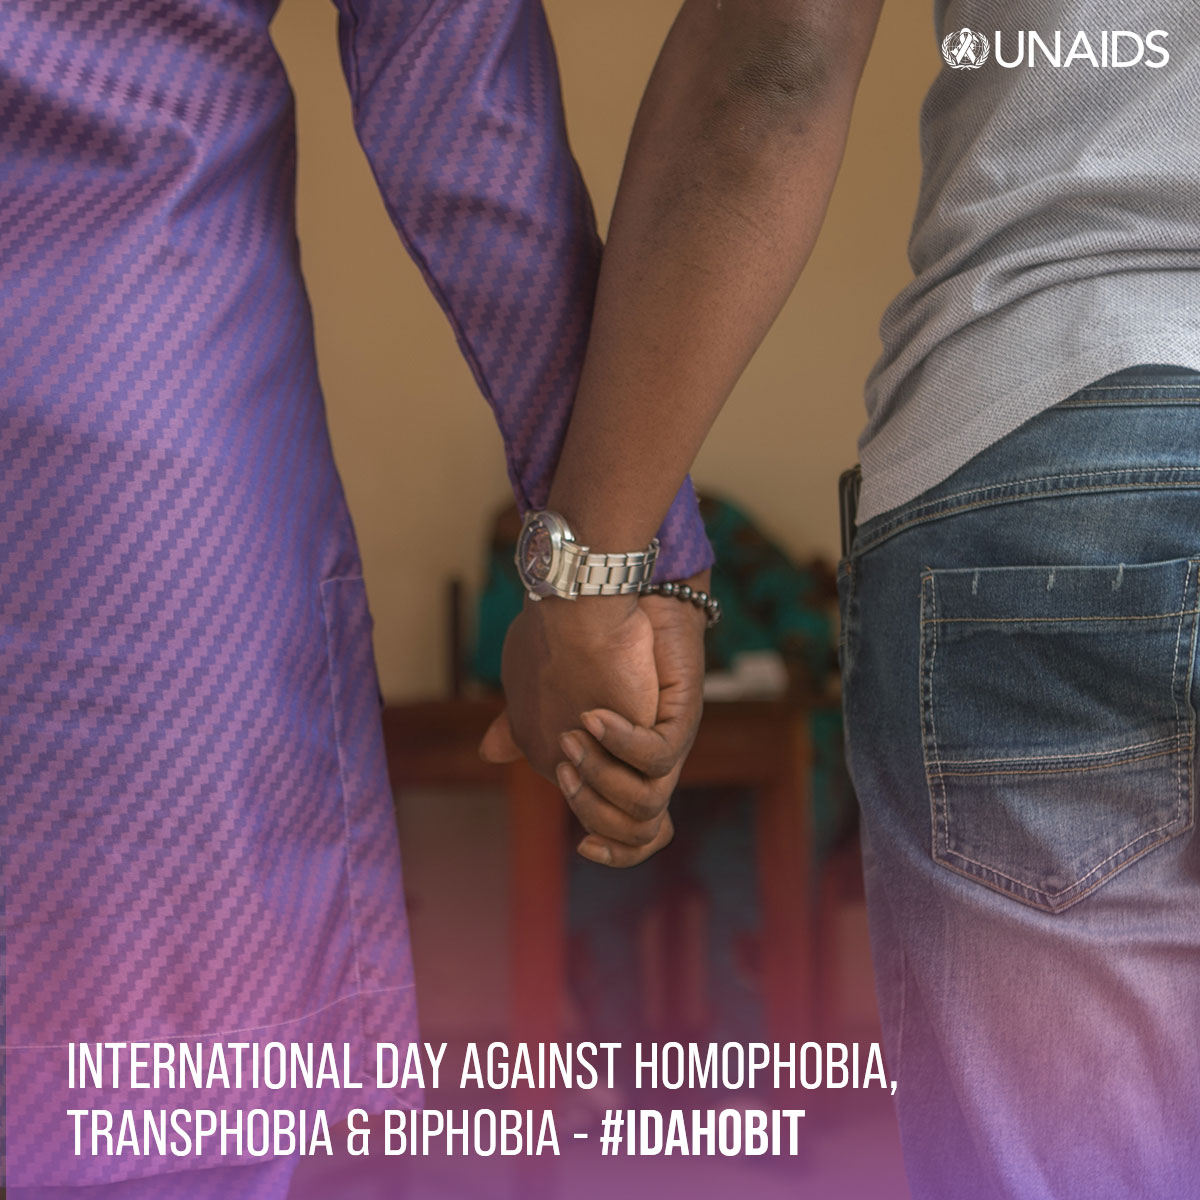 Criminalisation drives discrimination, stigma, even violence, and stops LGBTQI+ people from accessing critical health services. This #IDAHOBIT, we @UNAIDS urge all countries to support human rights and decriminalise homosexuality to ensure #HealthForAll. unaids.org/en/resources/p…